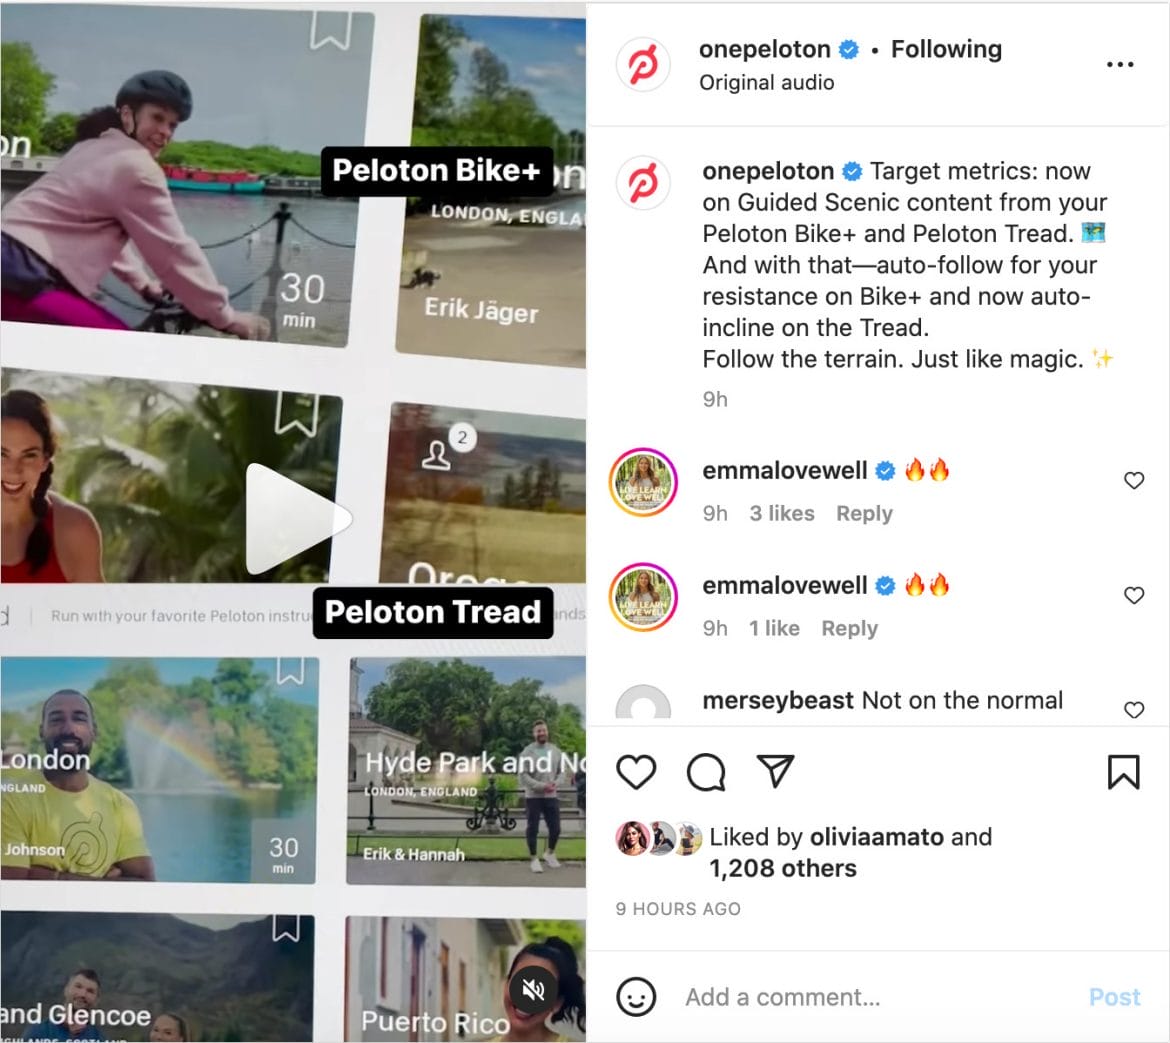 Peloton Instagram post announcing target metrics on guided scenic content.